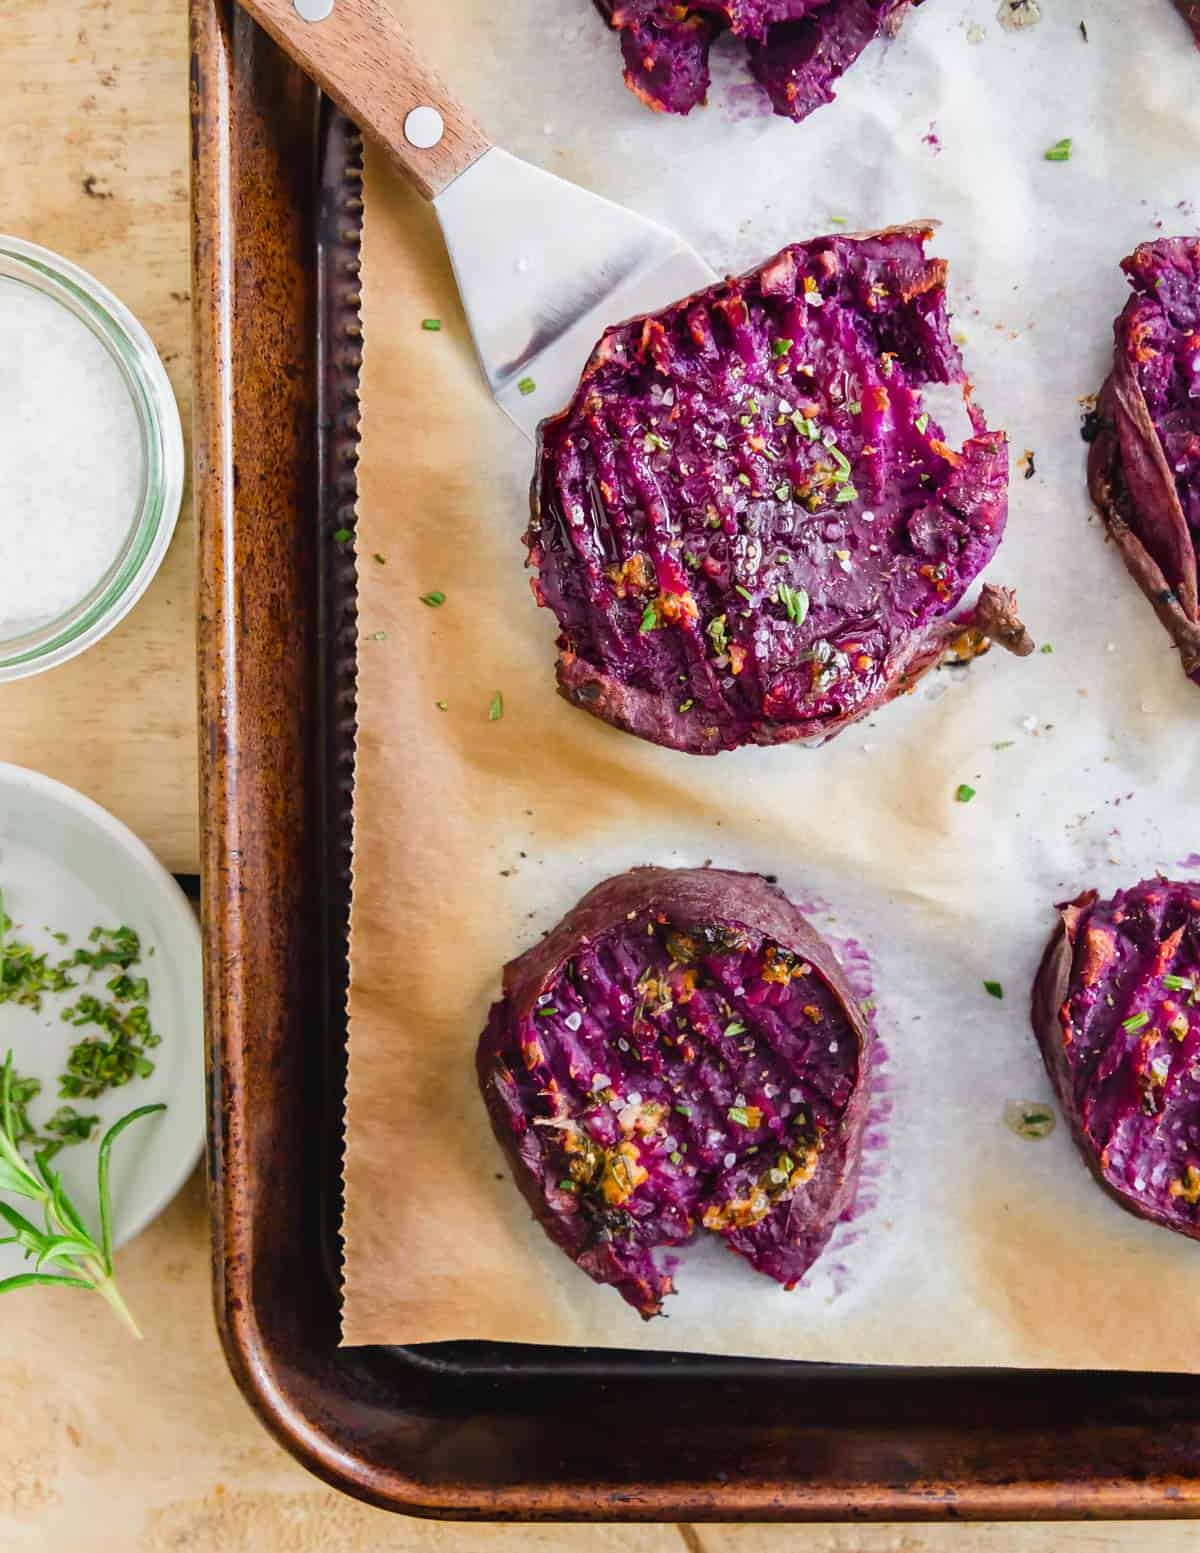 Stokes purple sweet potatoes are a stunning bright purple fleshed potato perfect for roasting with butter and herbs.